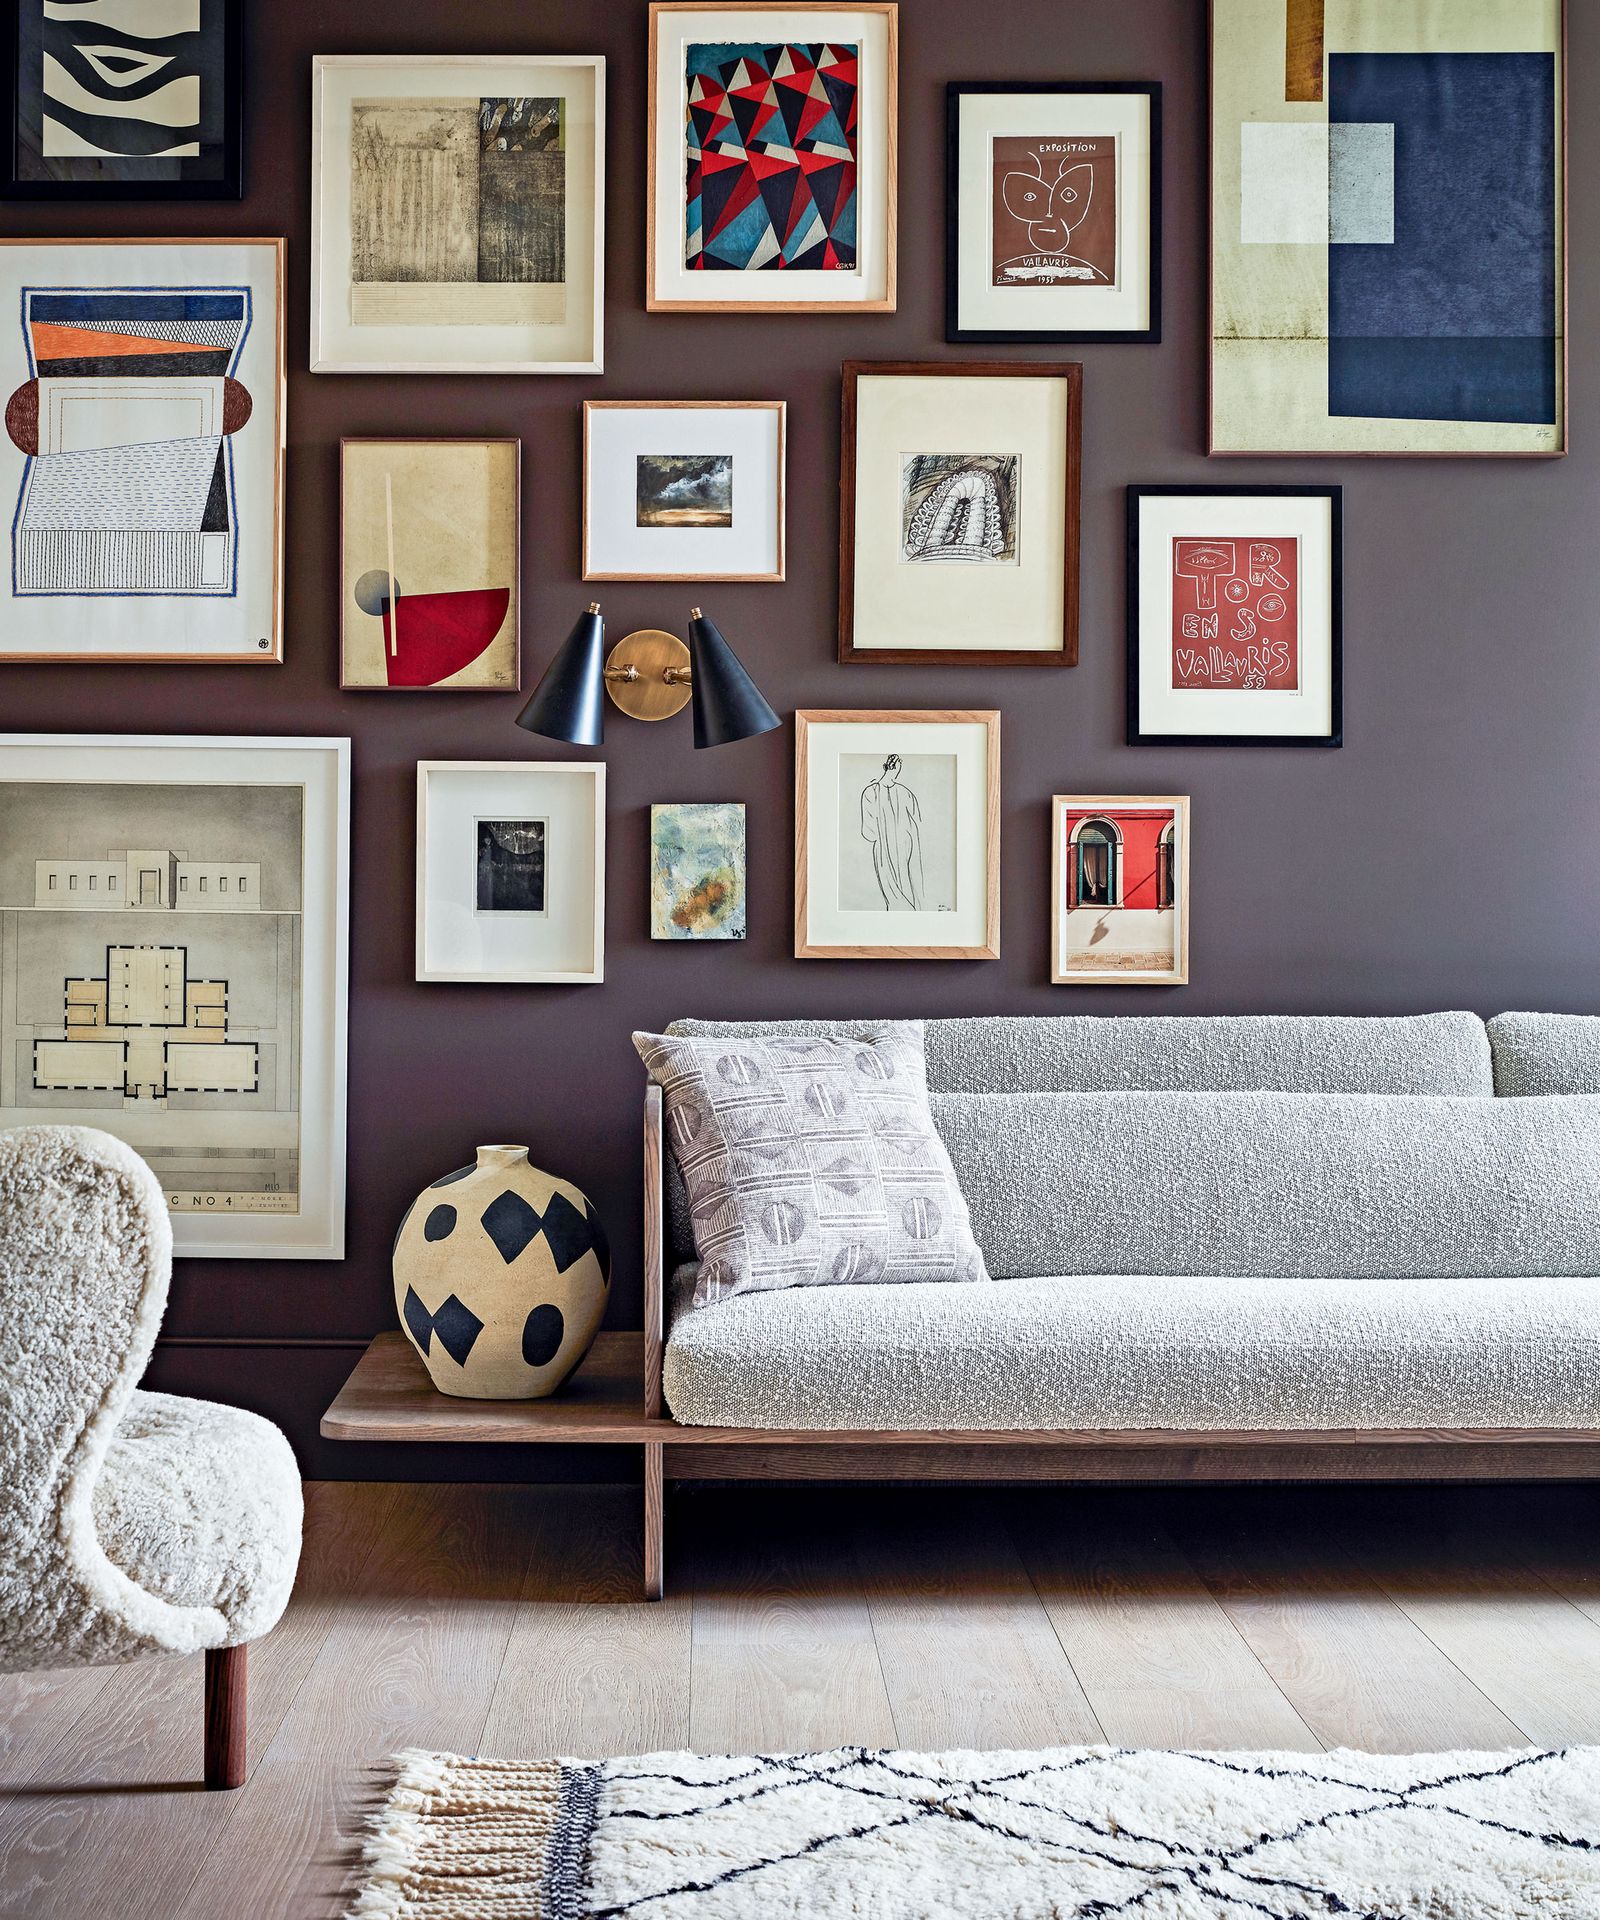 Couch colors to avoid: and what designers suggest instead